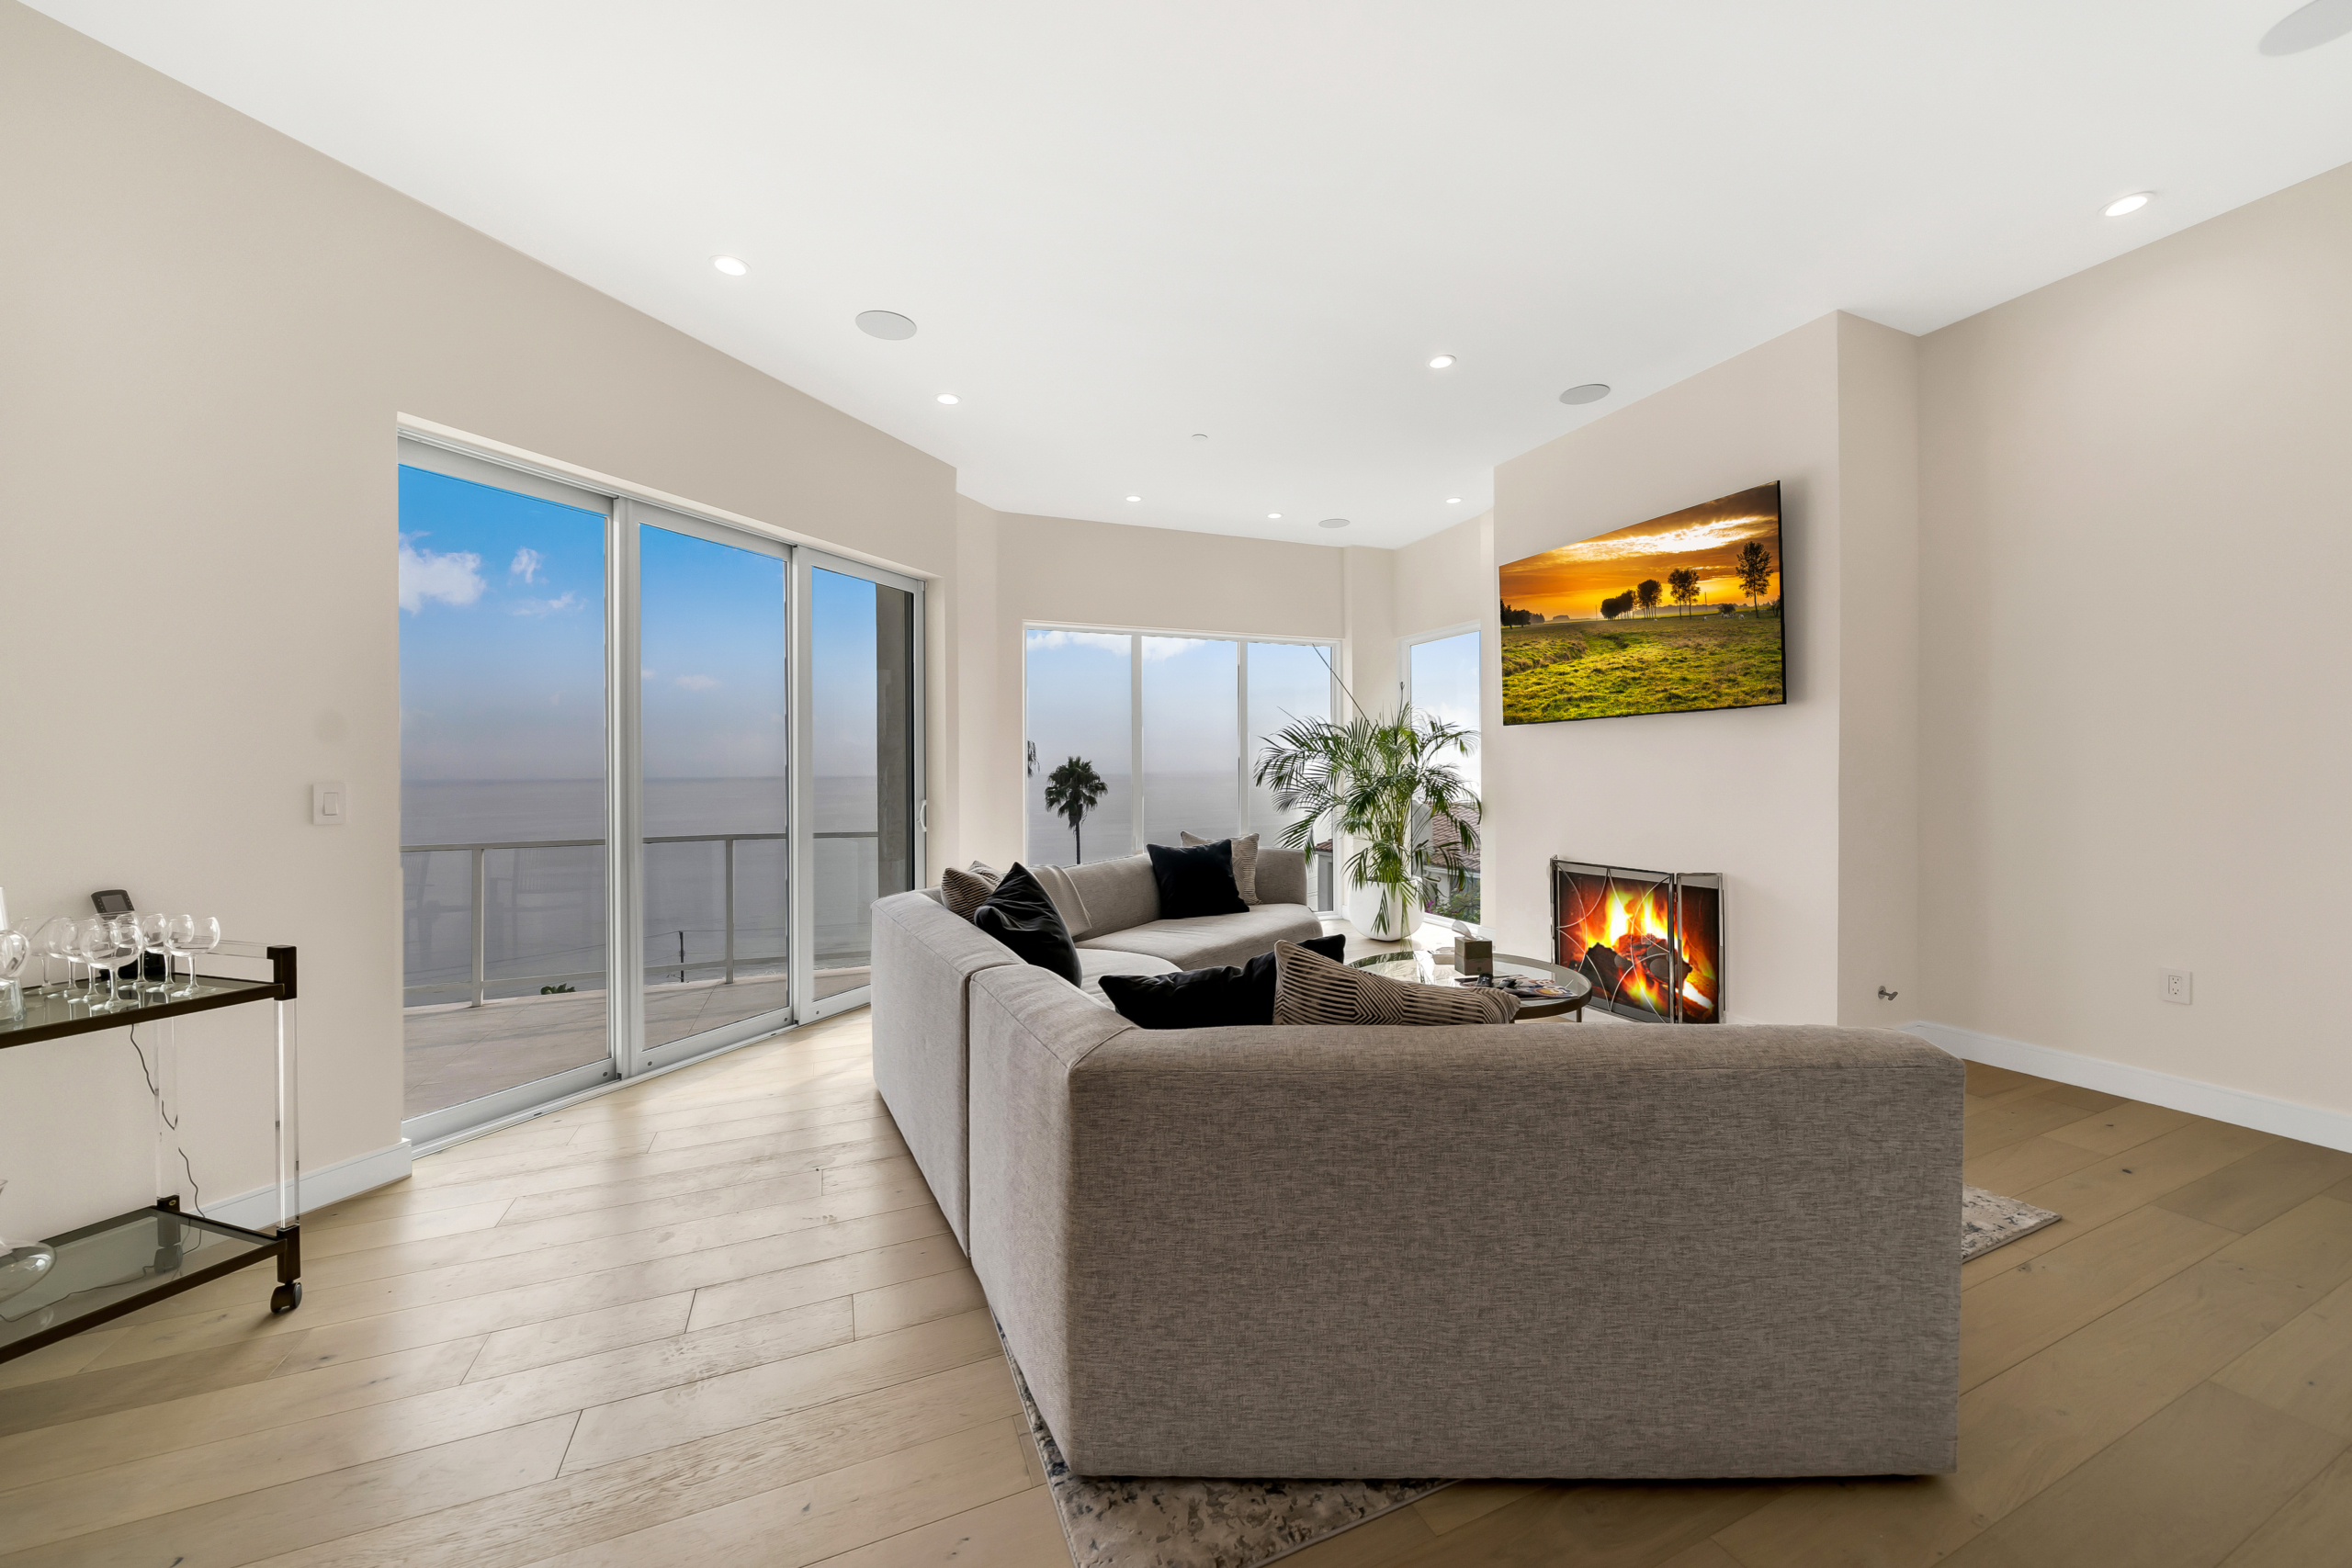 Angled view of living room space and fireplace. A large back of floor-to-ceiling windows and doors looking out to ocean